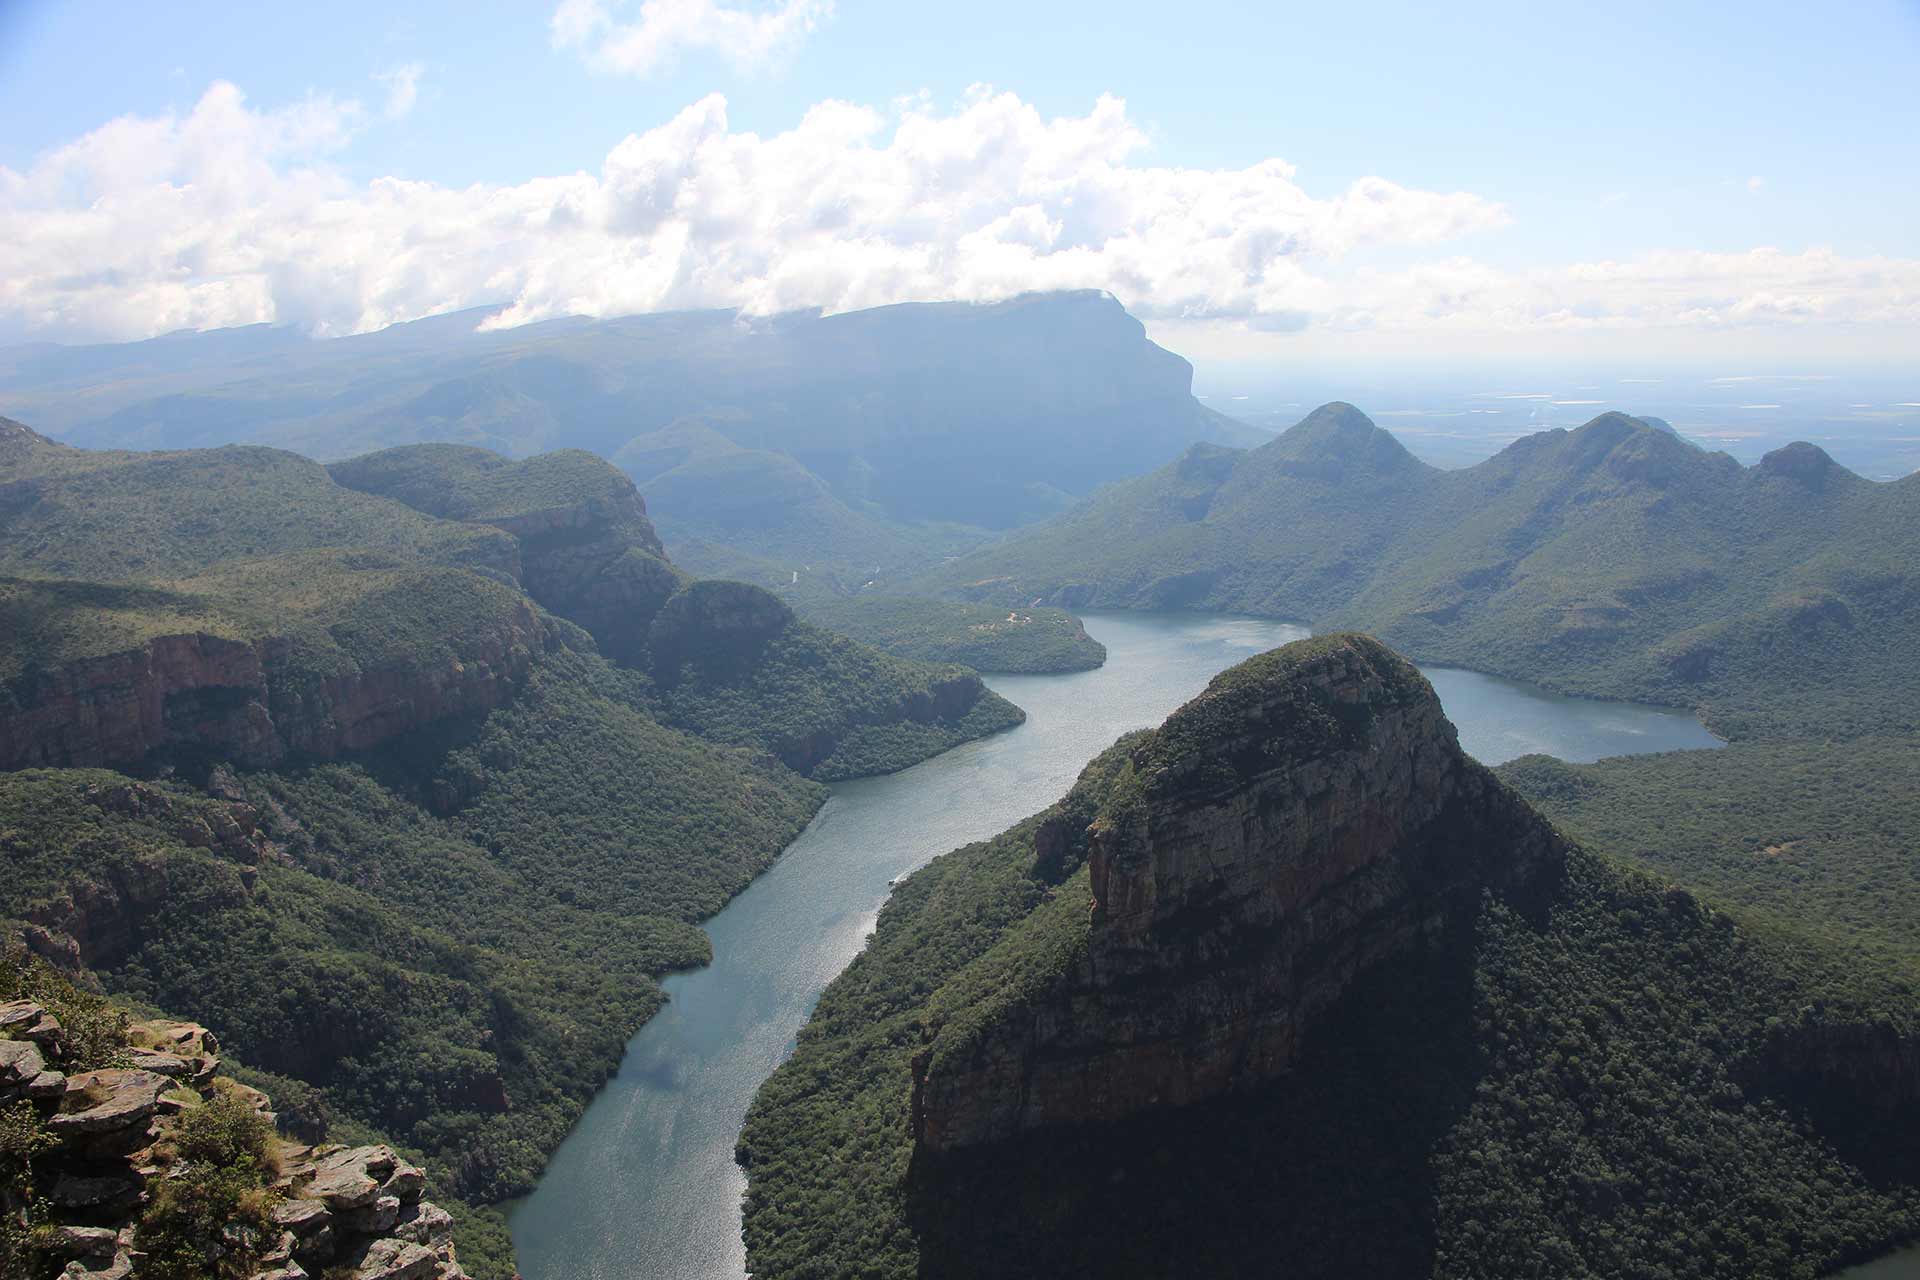 Savouring the panorama at Blyde River Canyon in South Africa.